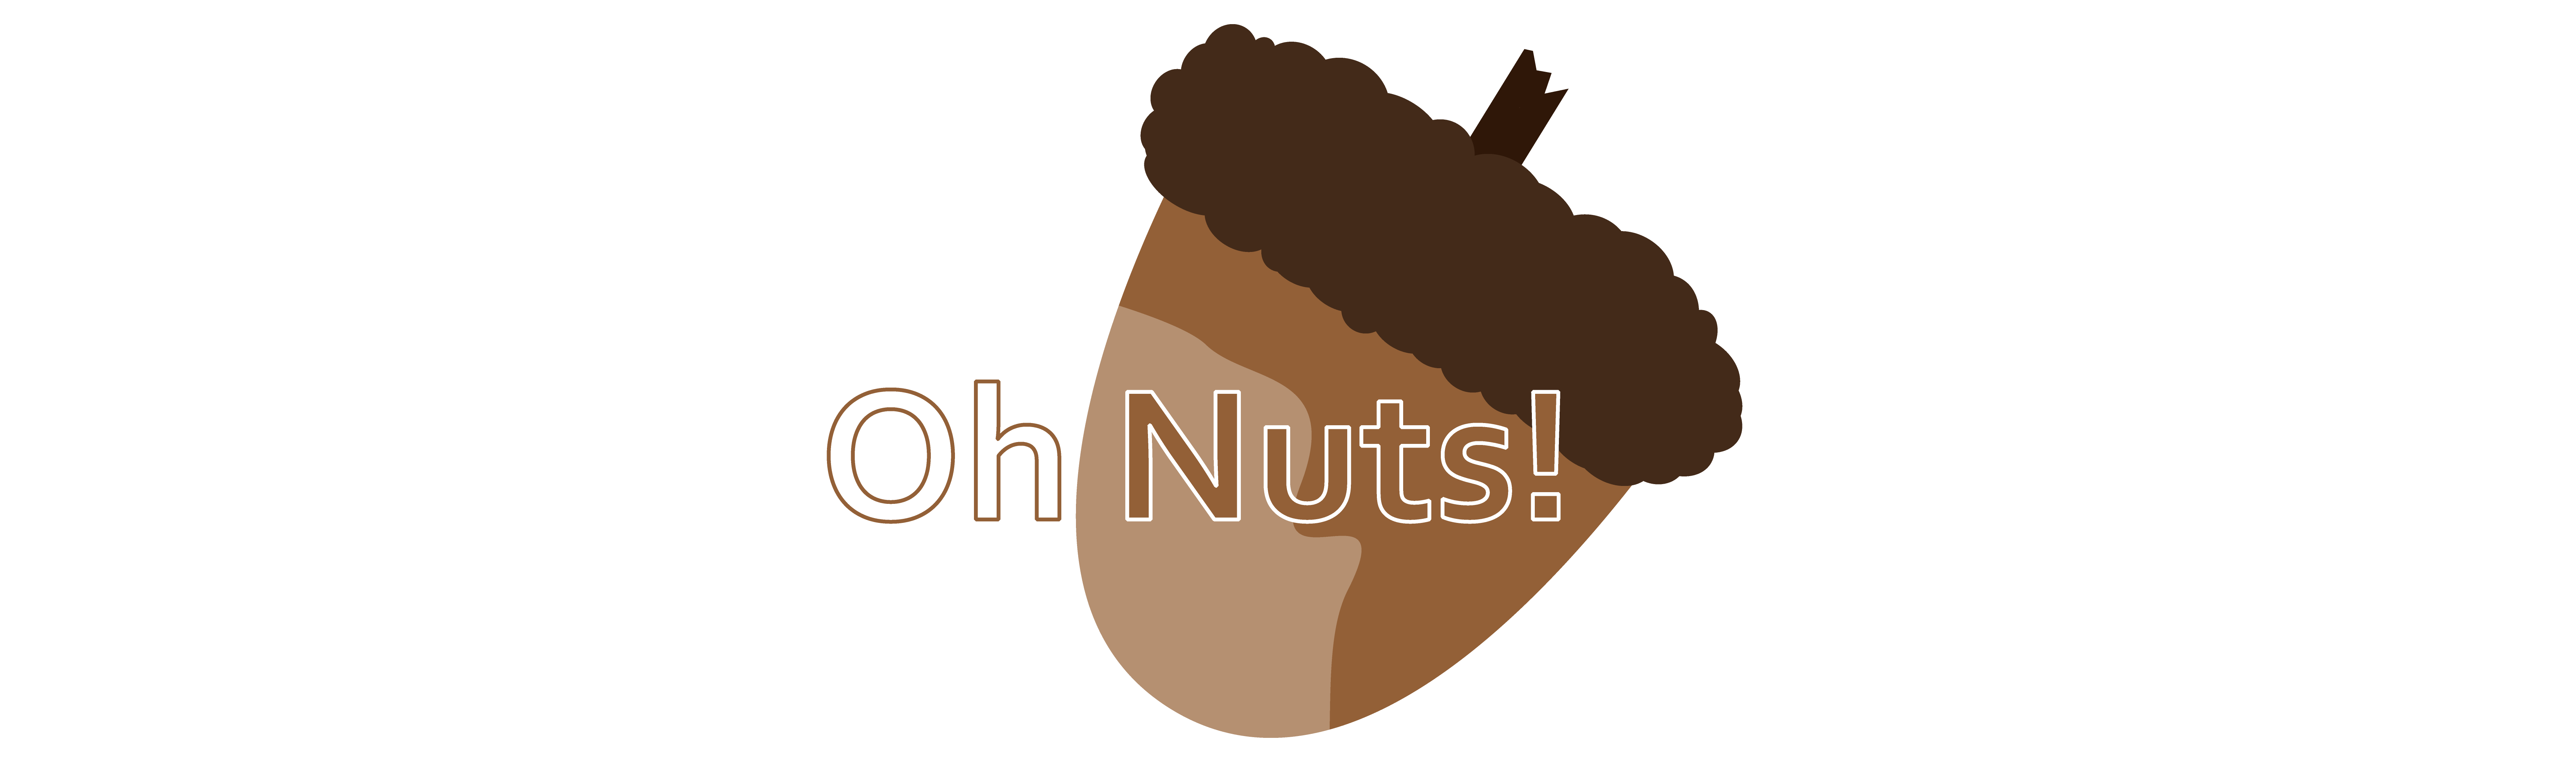 Oh Nuts!